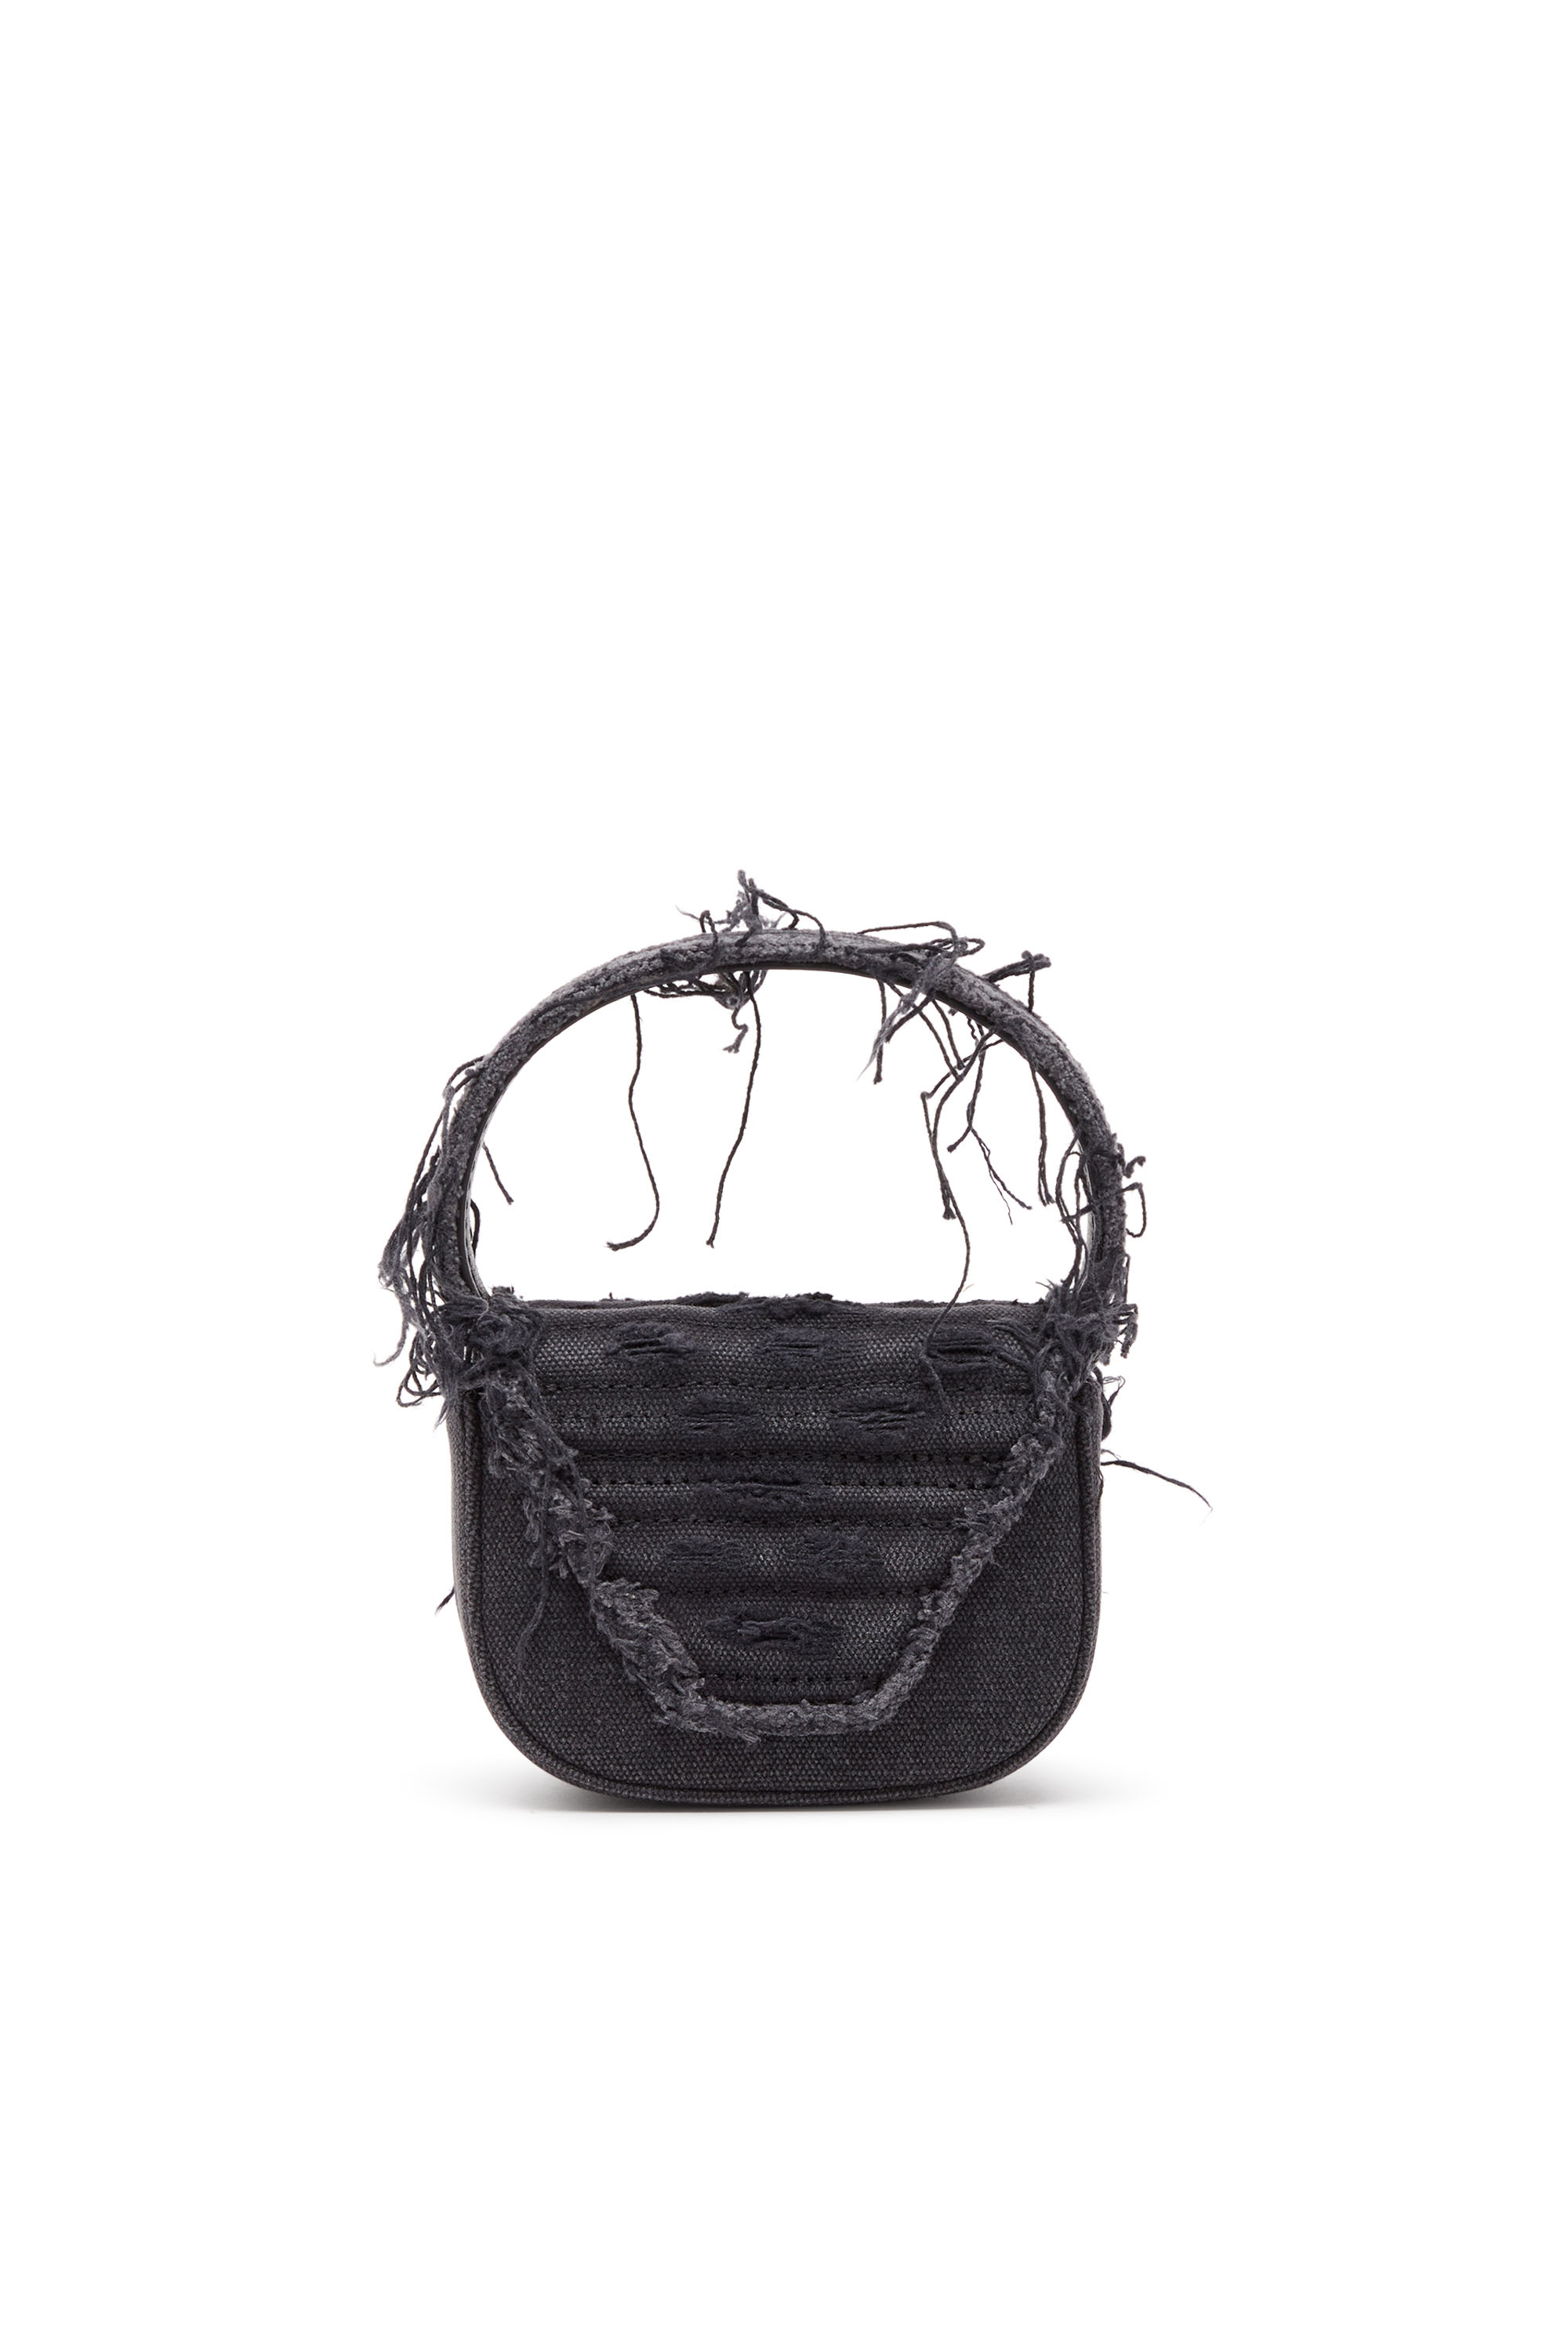 Diesel - 1DR XS, Woman 1DR XS-Iconic mini bag in canvas and leather in Black - Image 2